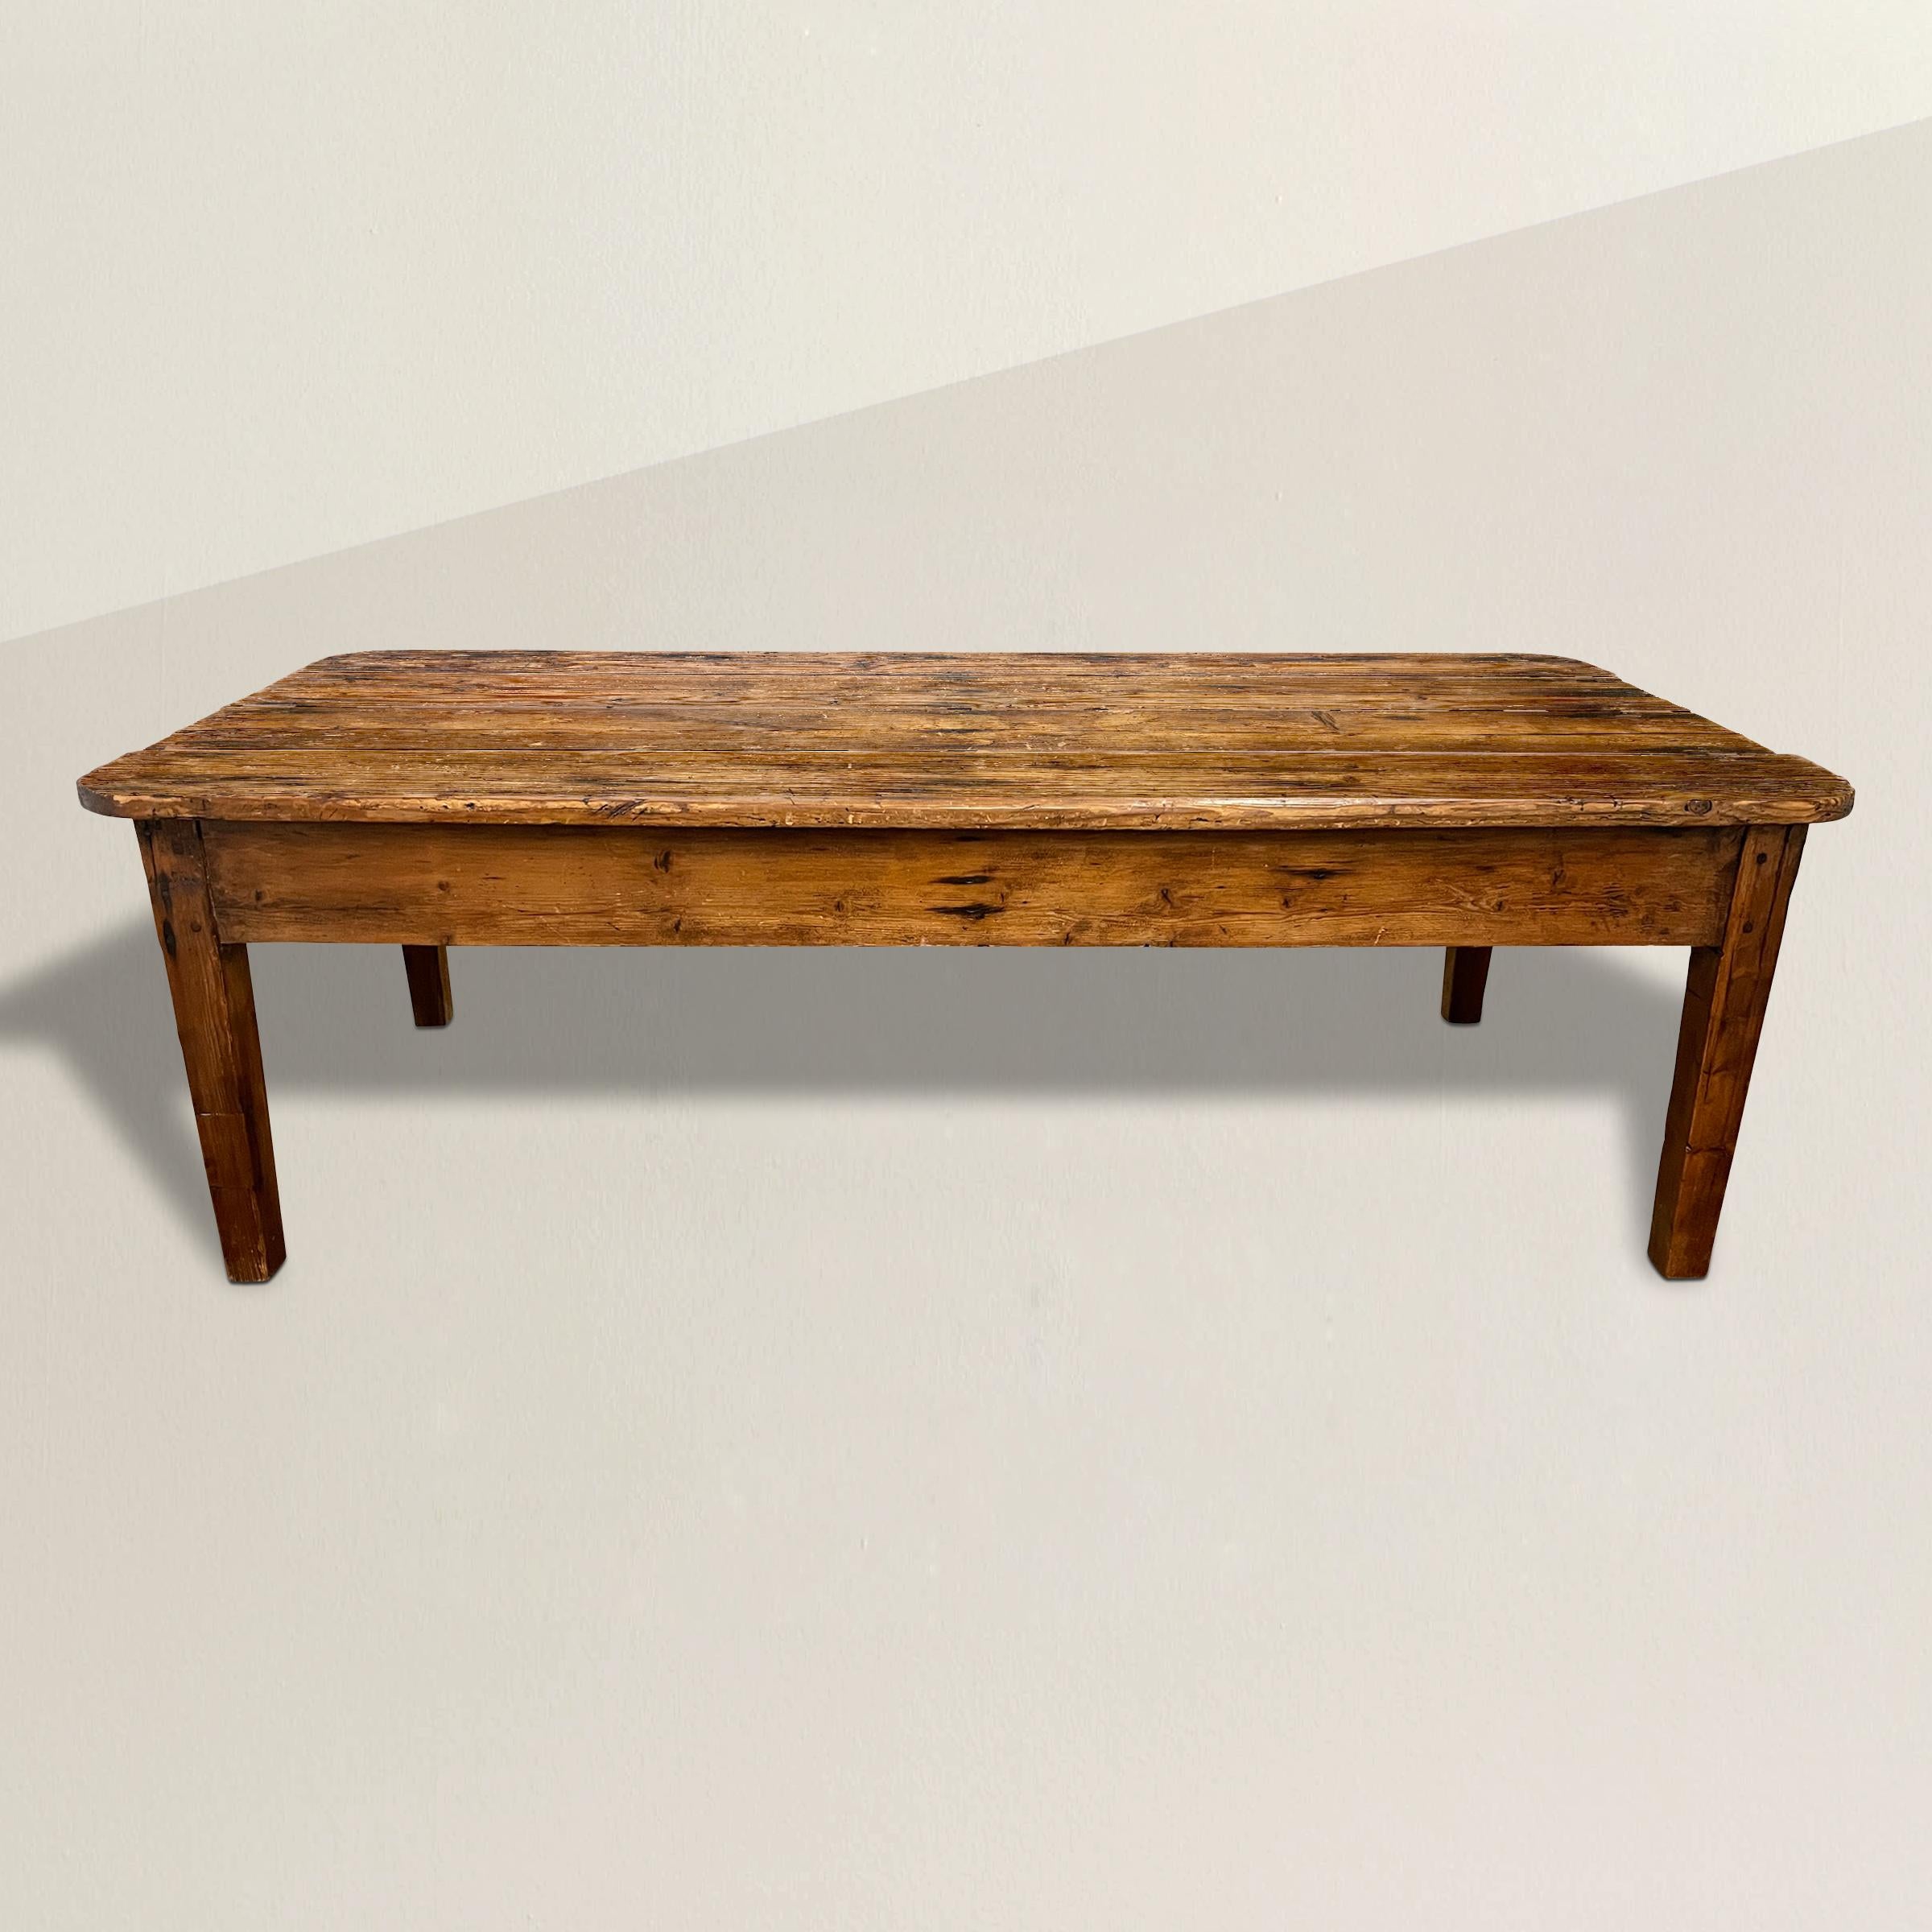 A perfect charming 19th century English pine low table with a top with four pine planks with rounded corners and the most wonderful patina, raised on a rectangular base with square tapered legs. Perfect in any country home, but also right at home